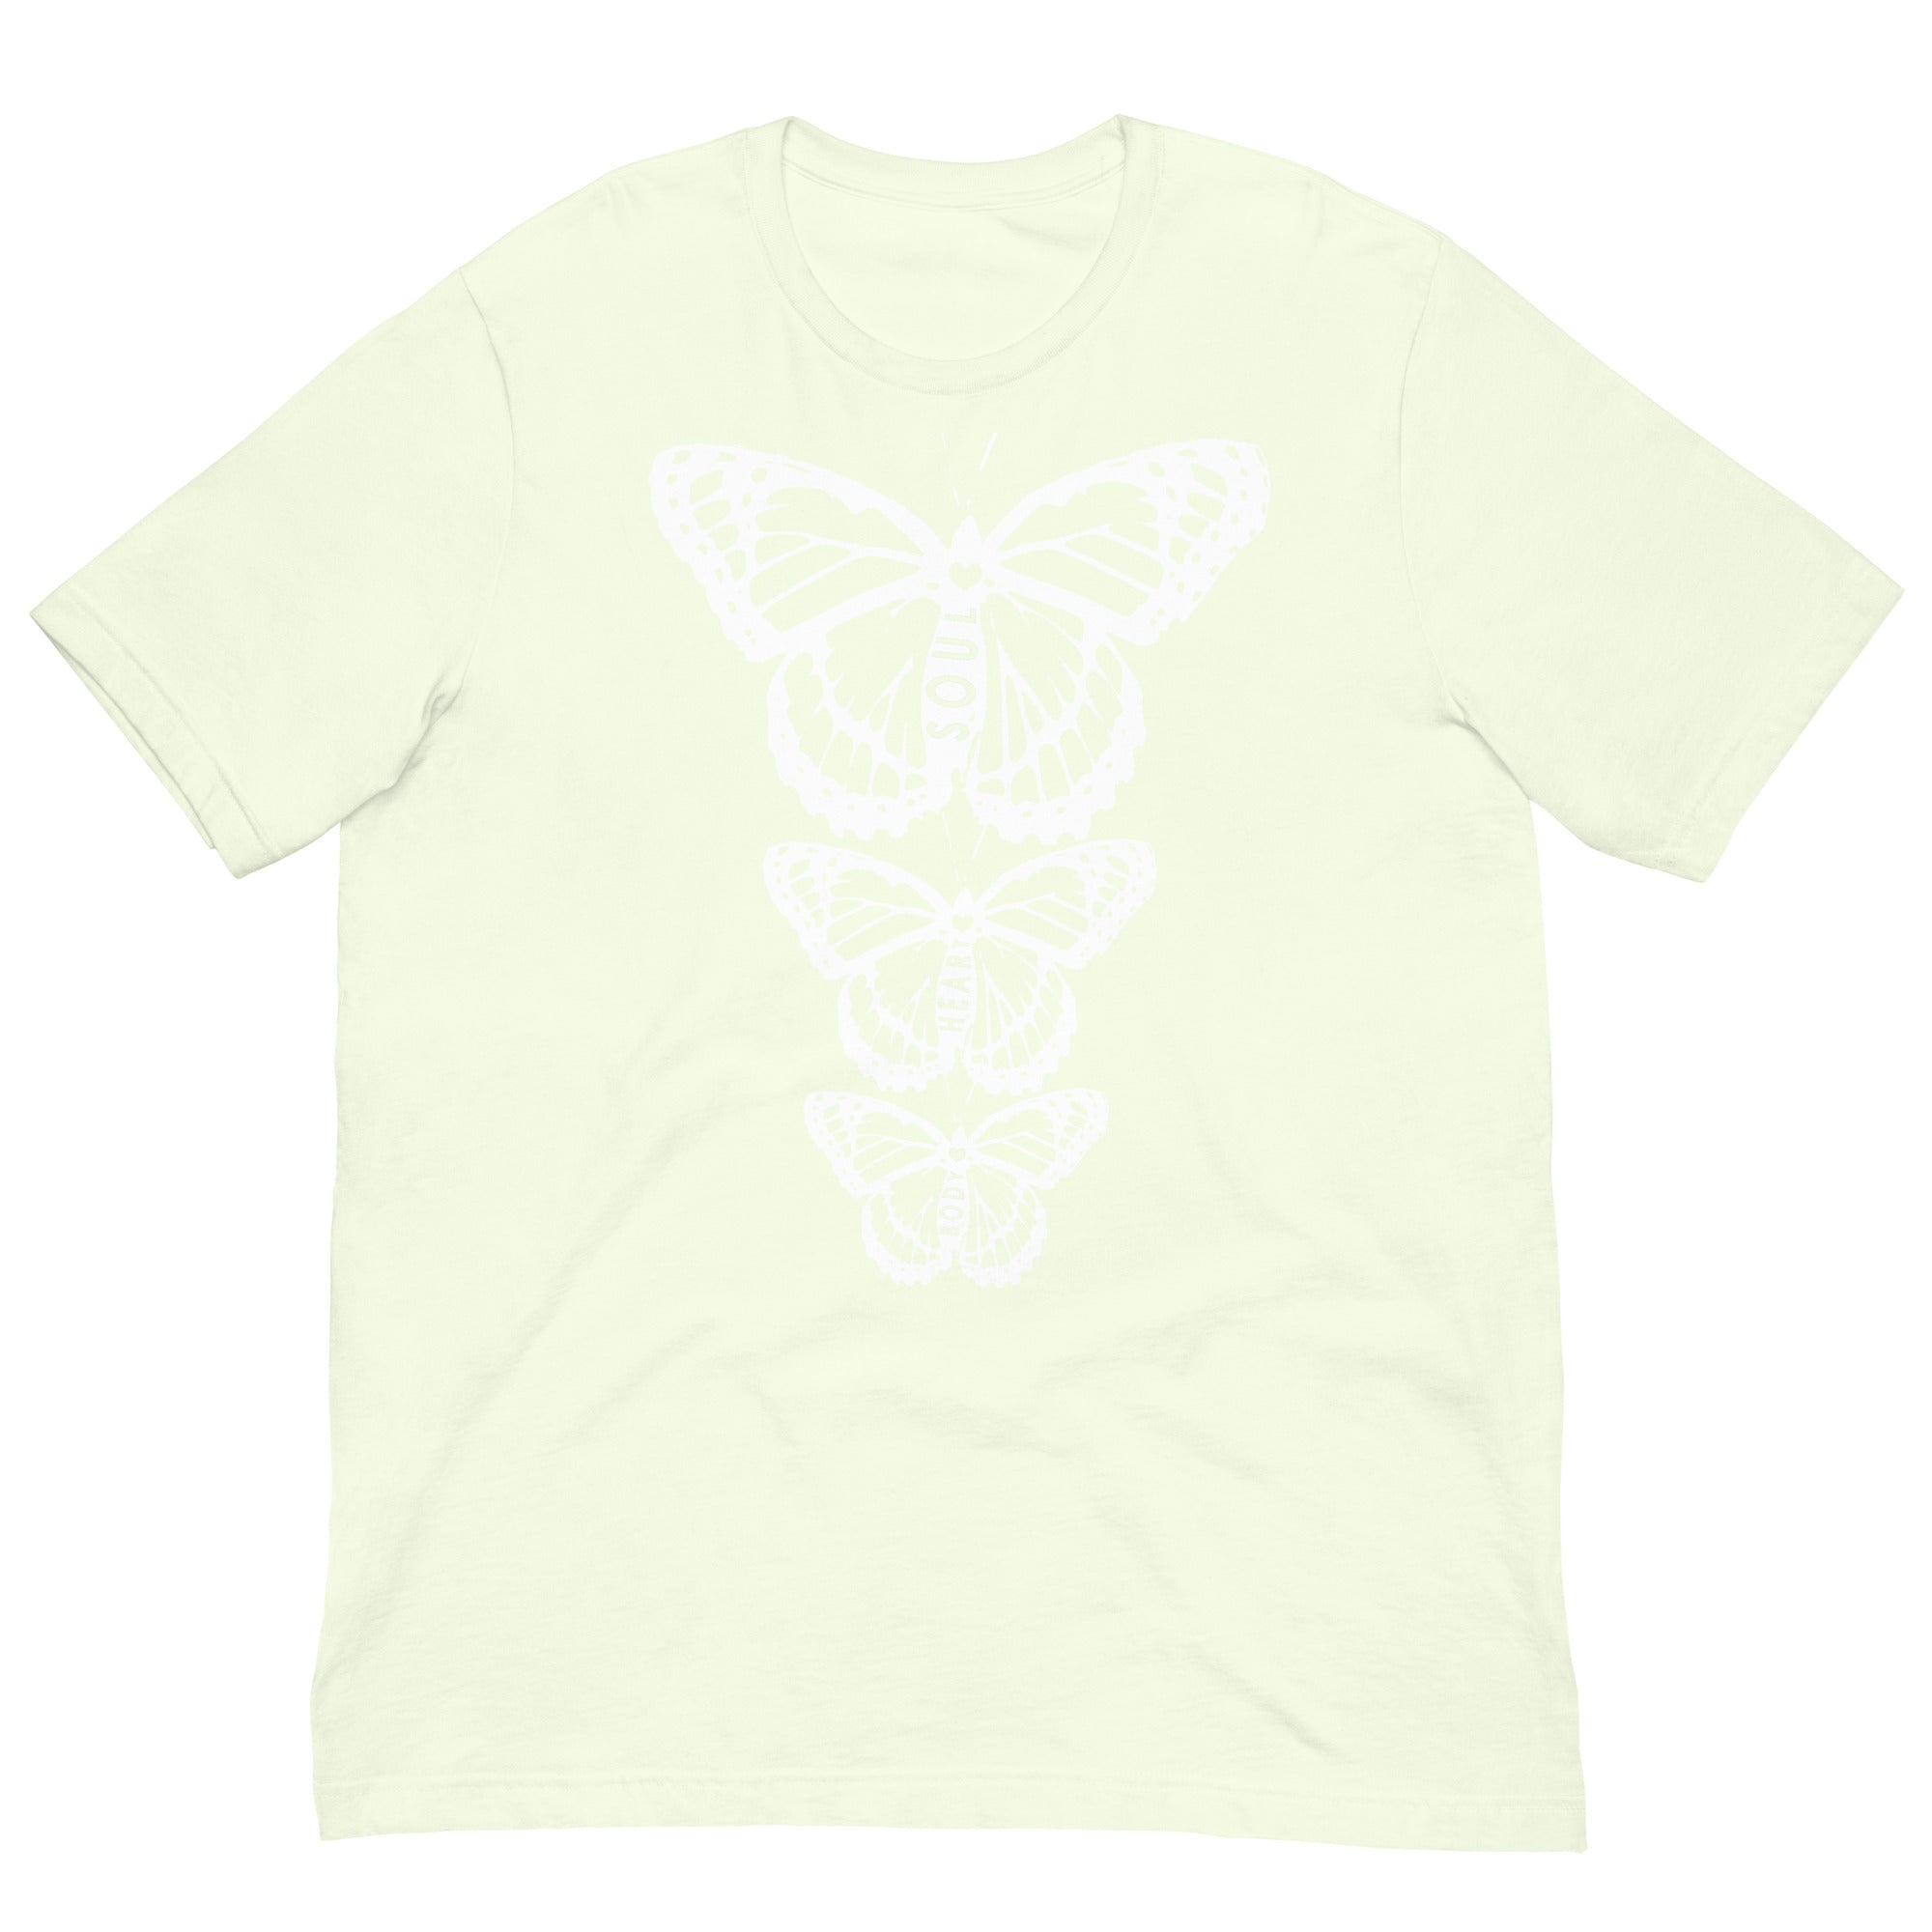 Body Heart & Soul Butterfly Unisex Graphic Colored T-Shirts